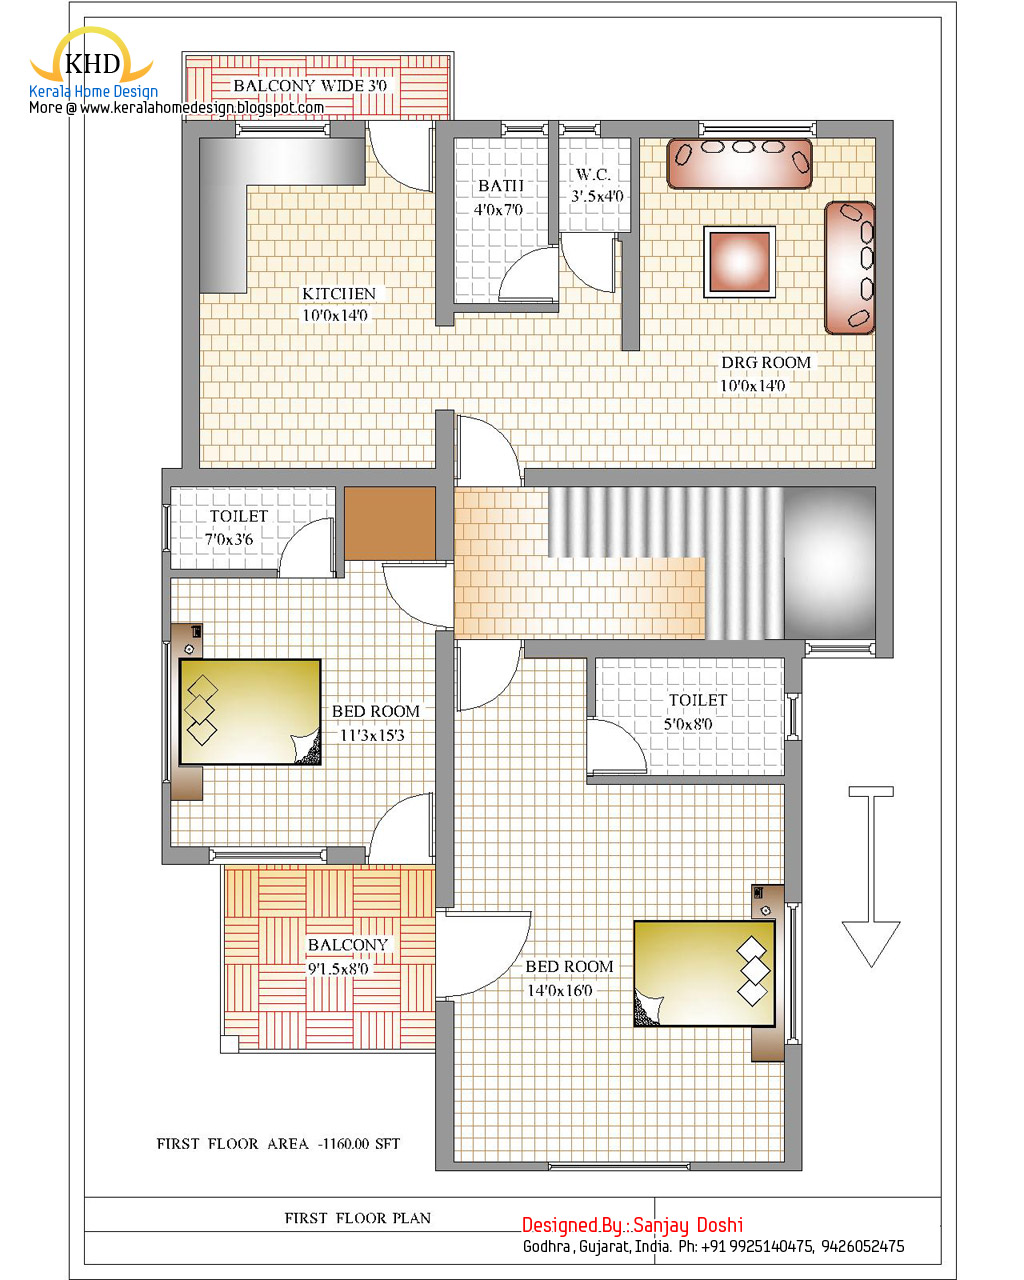  Duplex  House  Plan  and Elevation 2310 Sq Ft a taste 